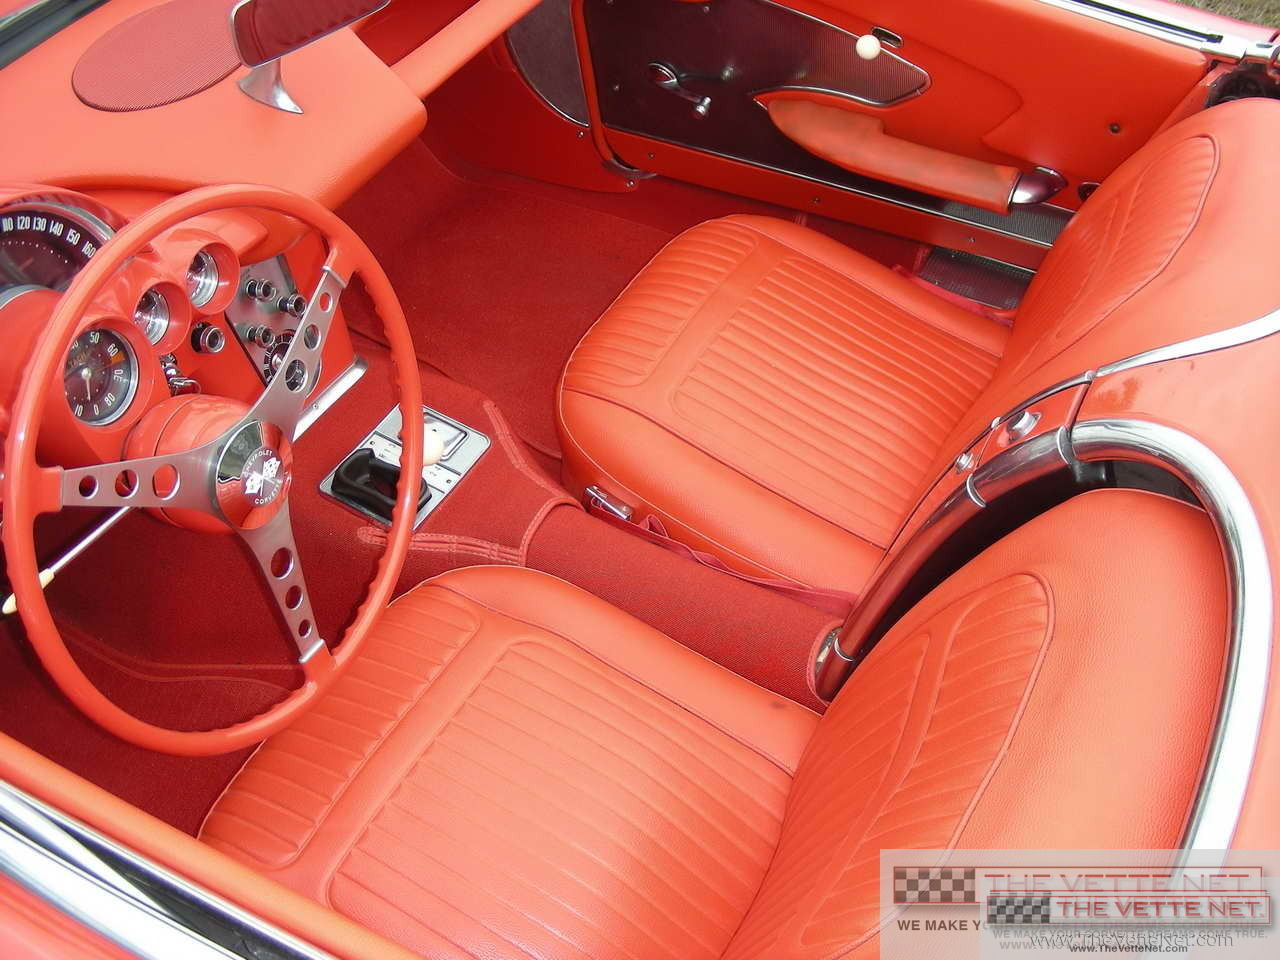 1958 Corvette Convertible Red with White Coves